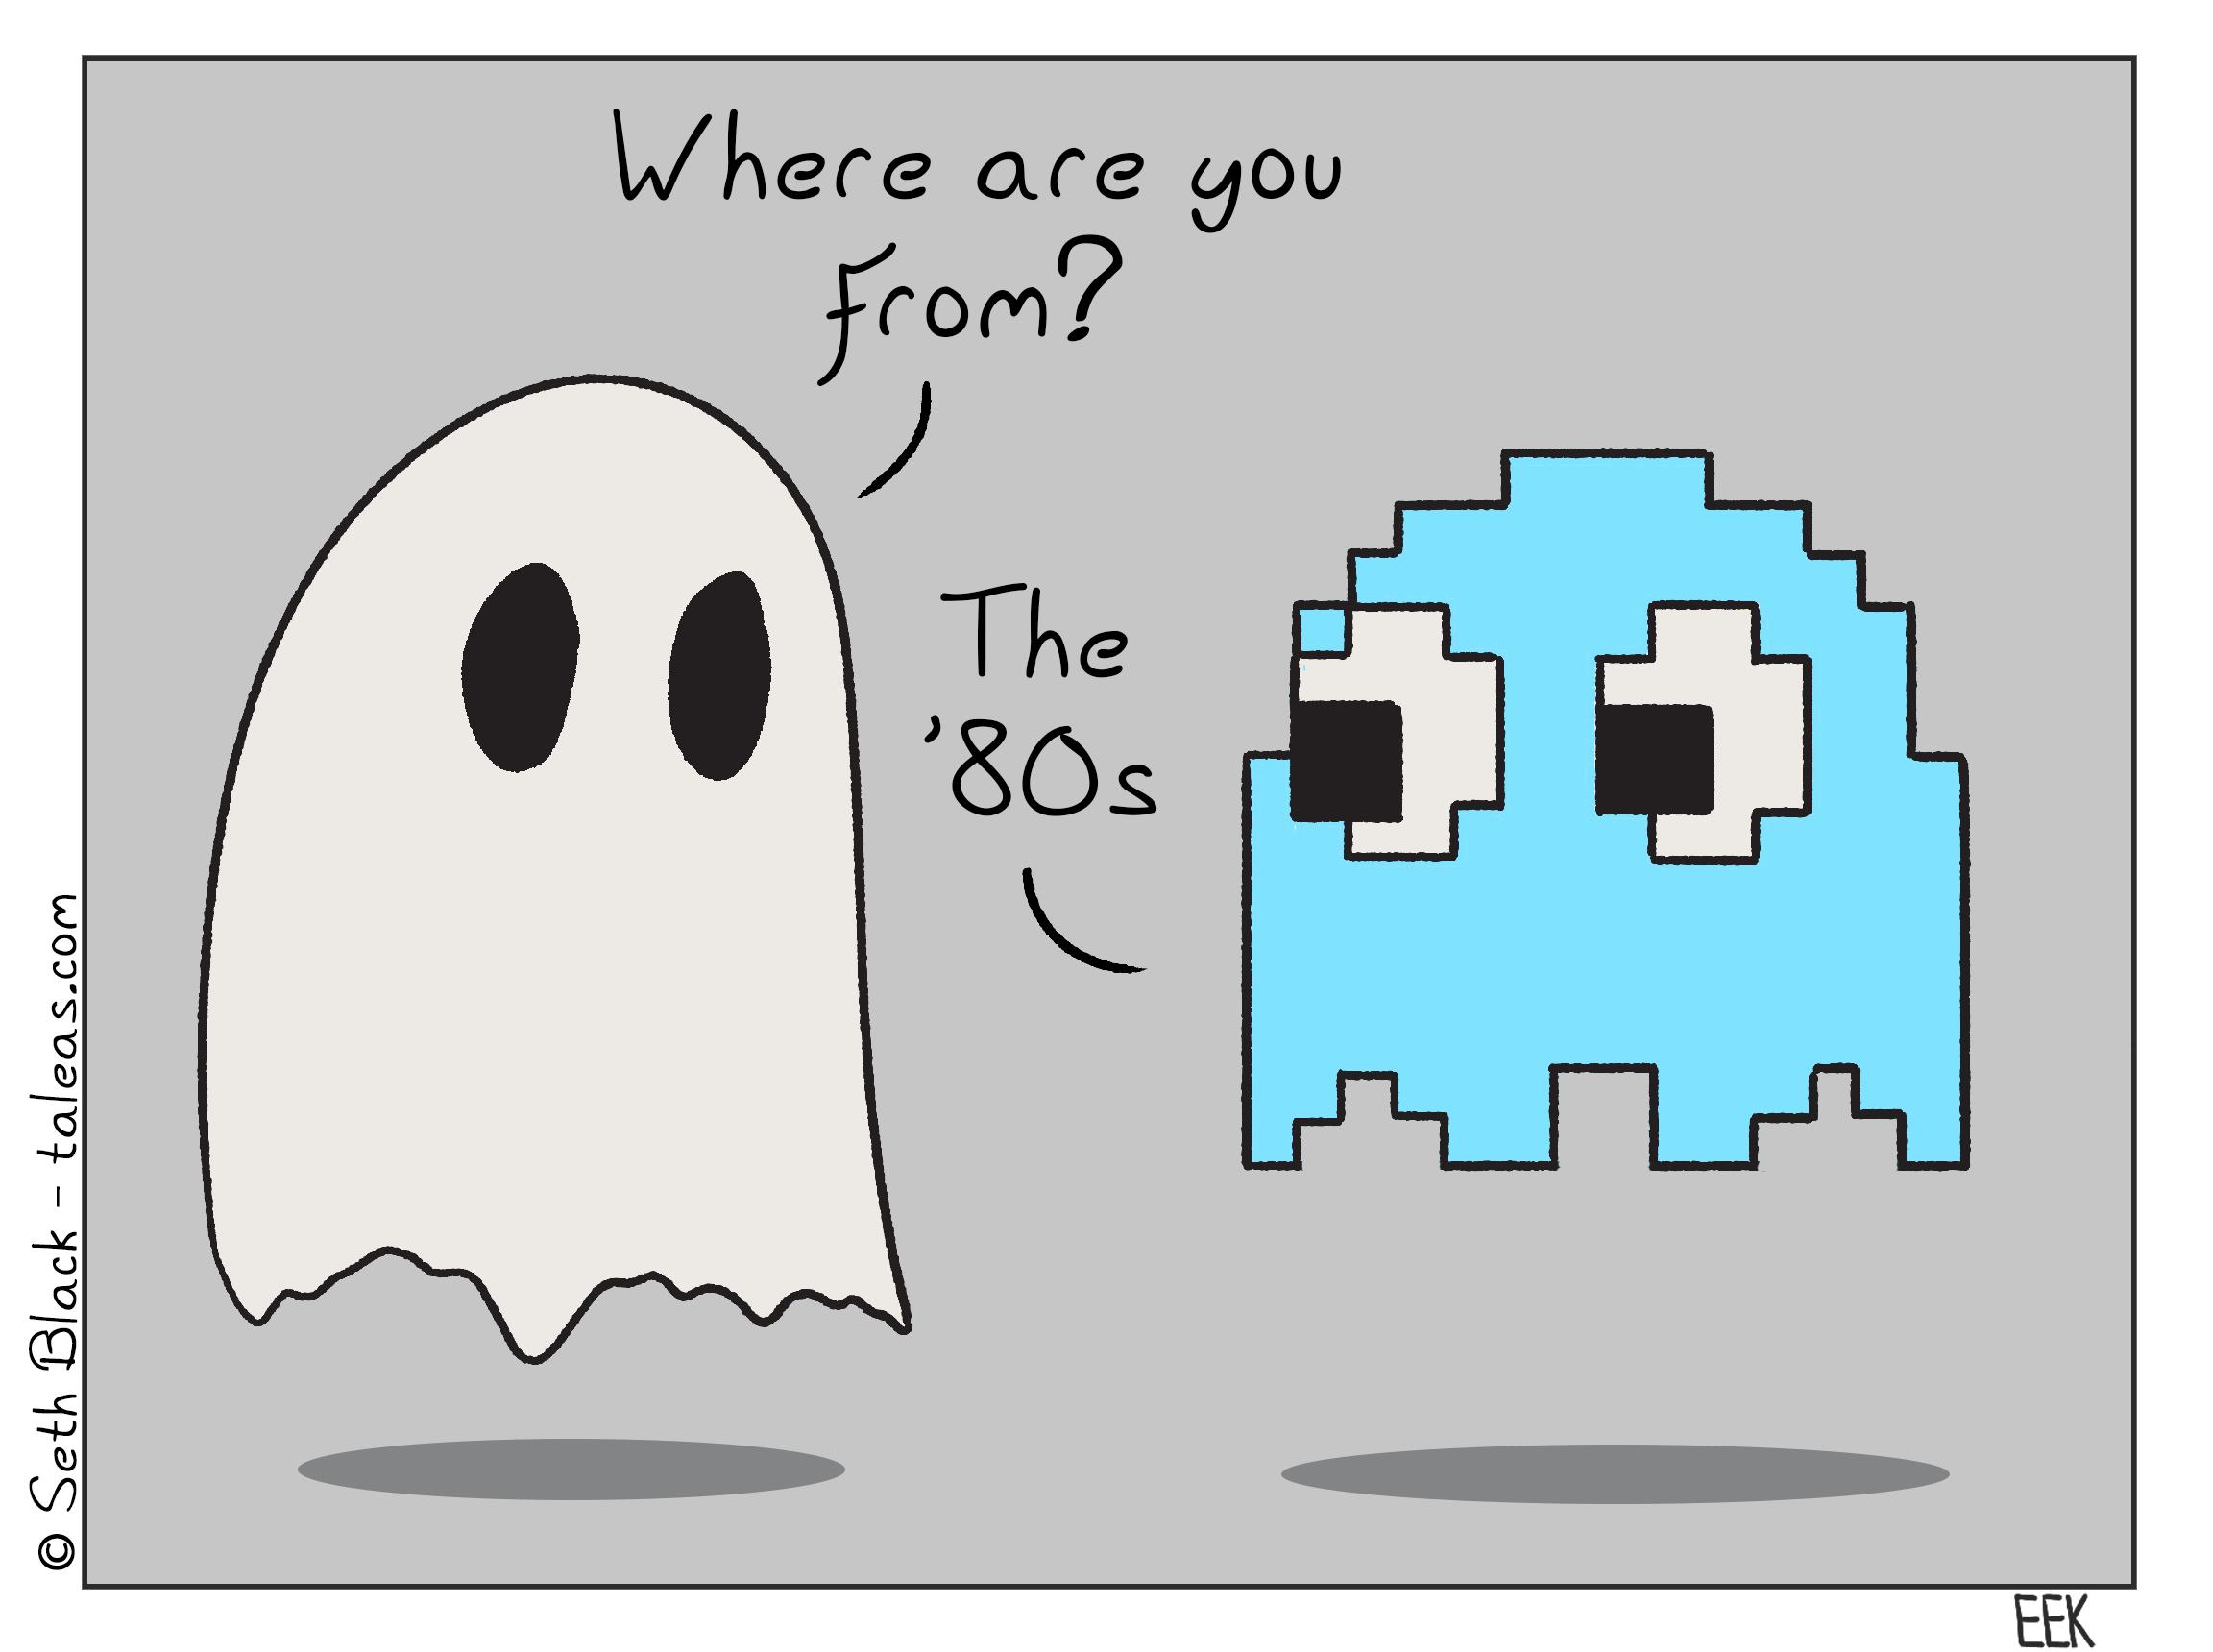 Ghostie is floating next to a blue pixelated ghost resembling Inky from Pac-man. Ghostie asks the pixelated ghost, "Where are you from?" and the pixelated ghost responds, "the 80's".